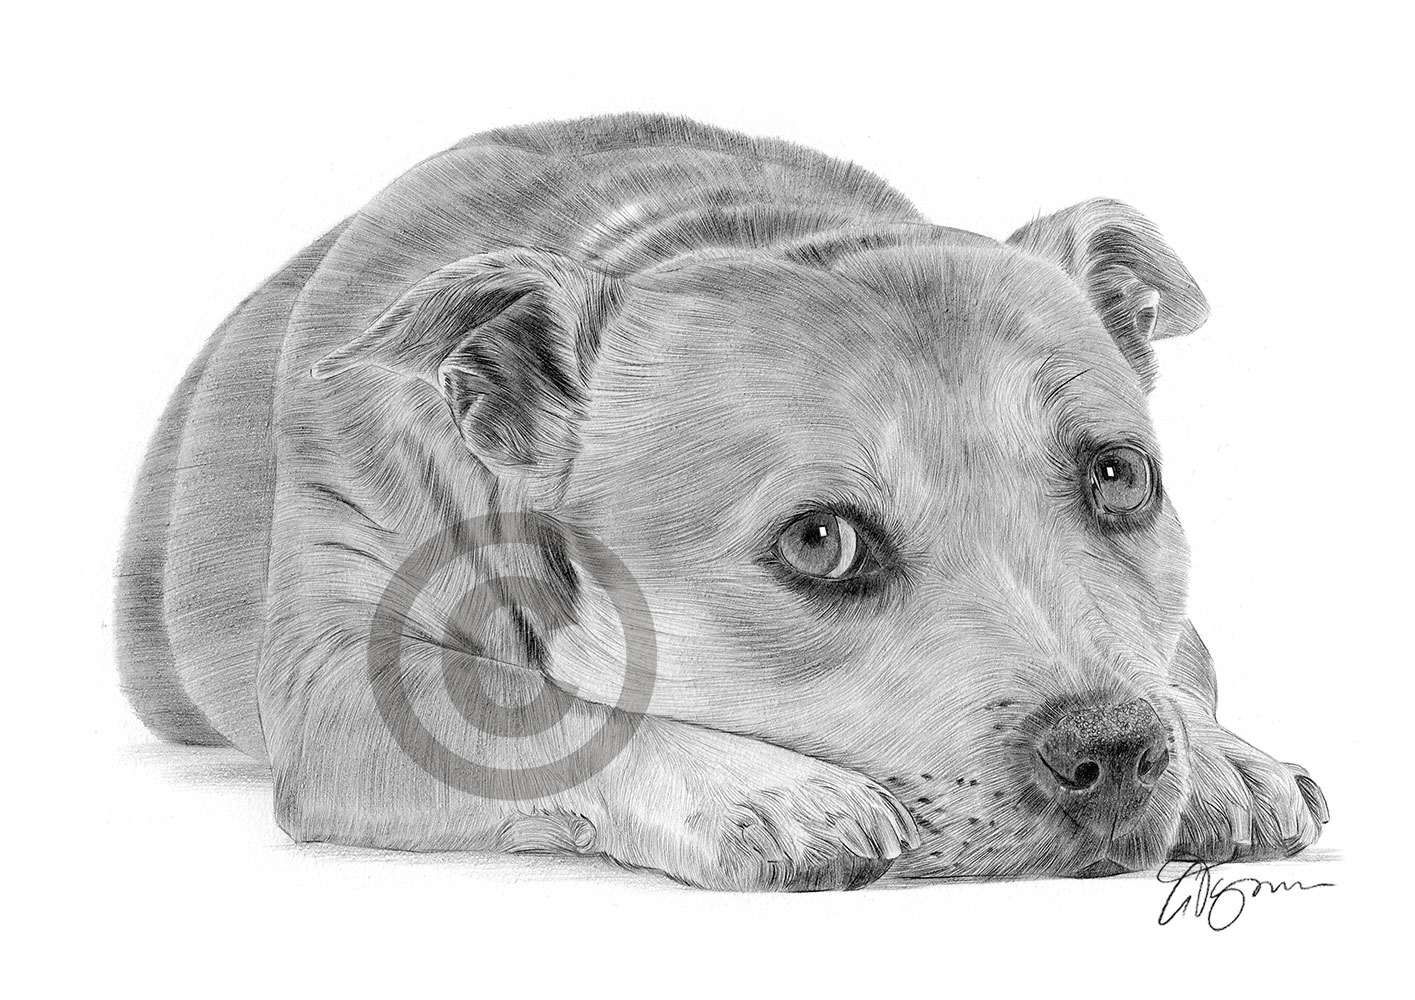 Pencil drawing of a staffordshire bull terrier in landscape by artist Gary Tymon